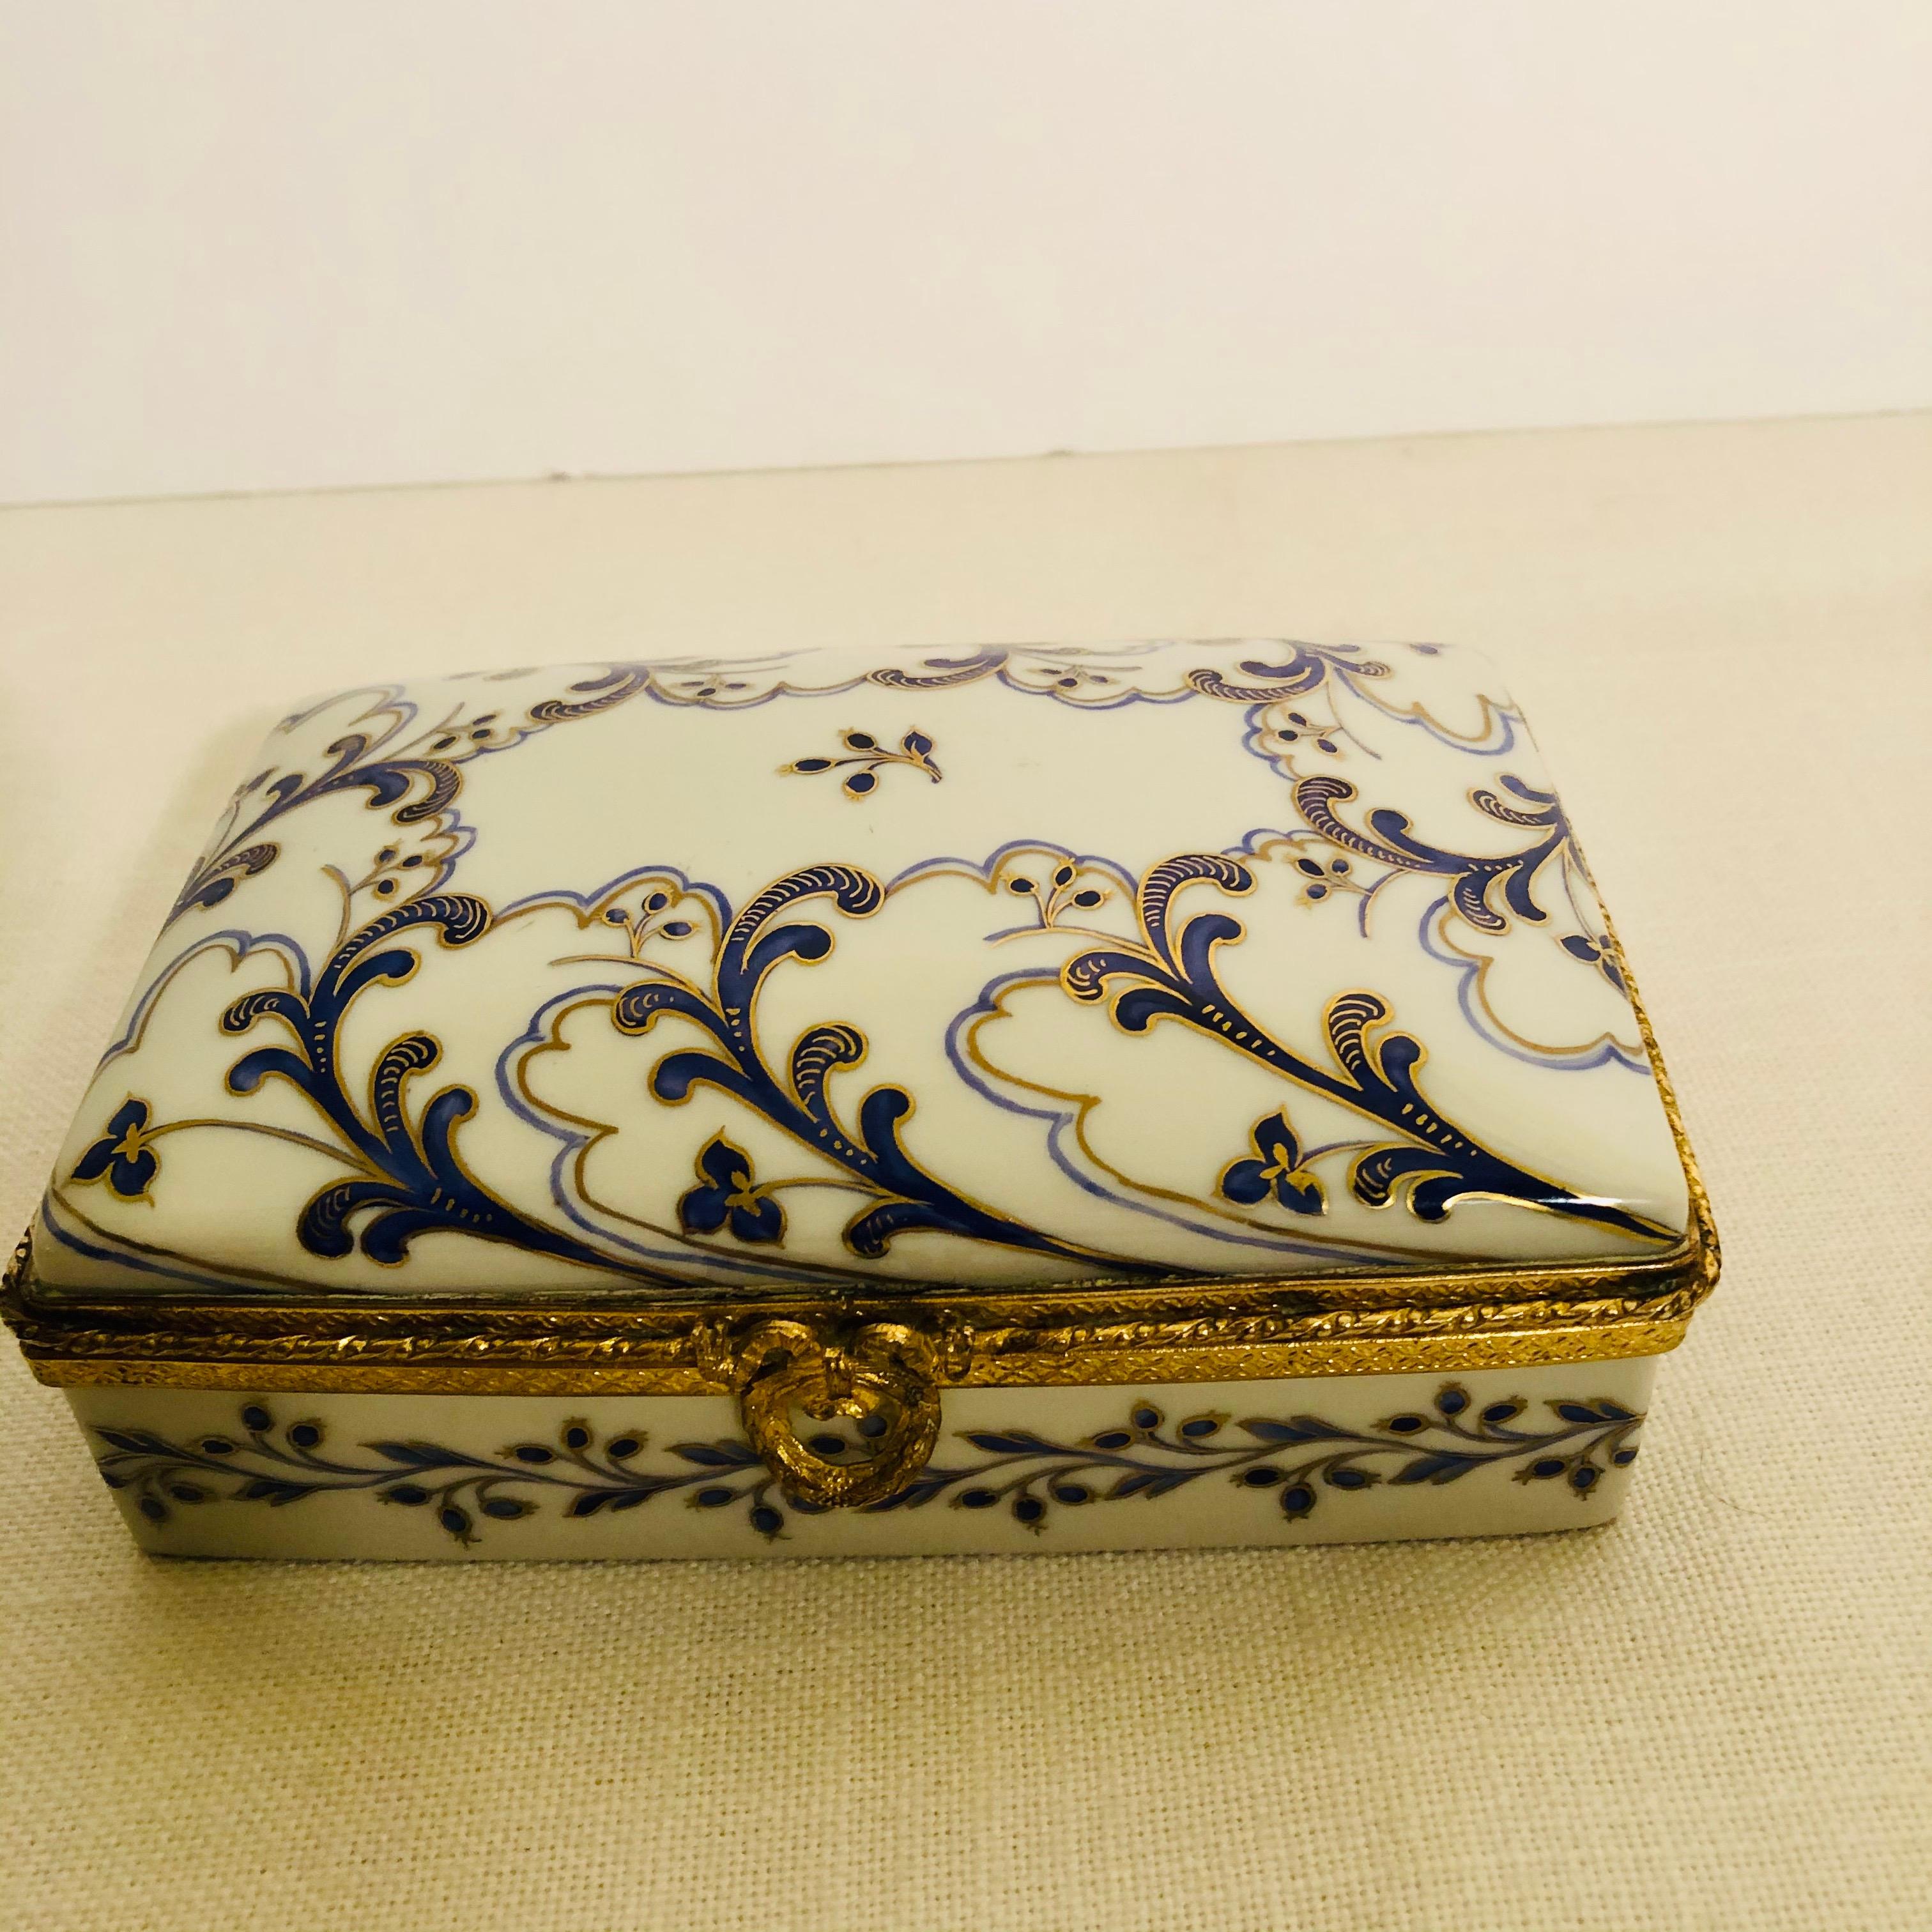 Rococo Le Tallec Porcelain Box with Hand-Painted Cobalt and Gold Arabesque Decoration